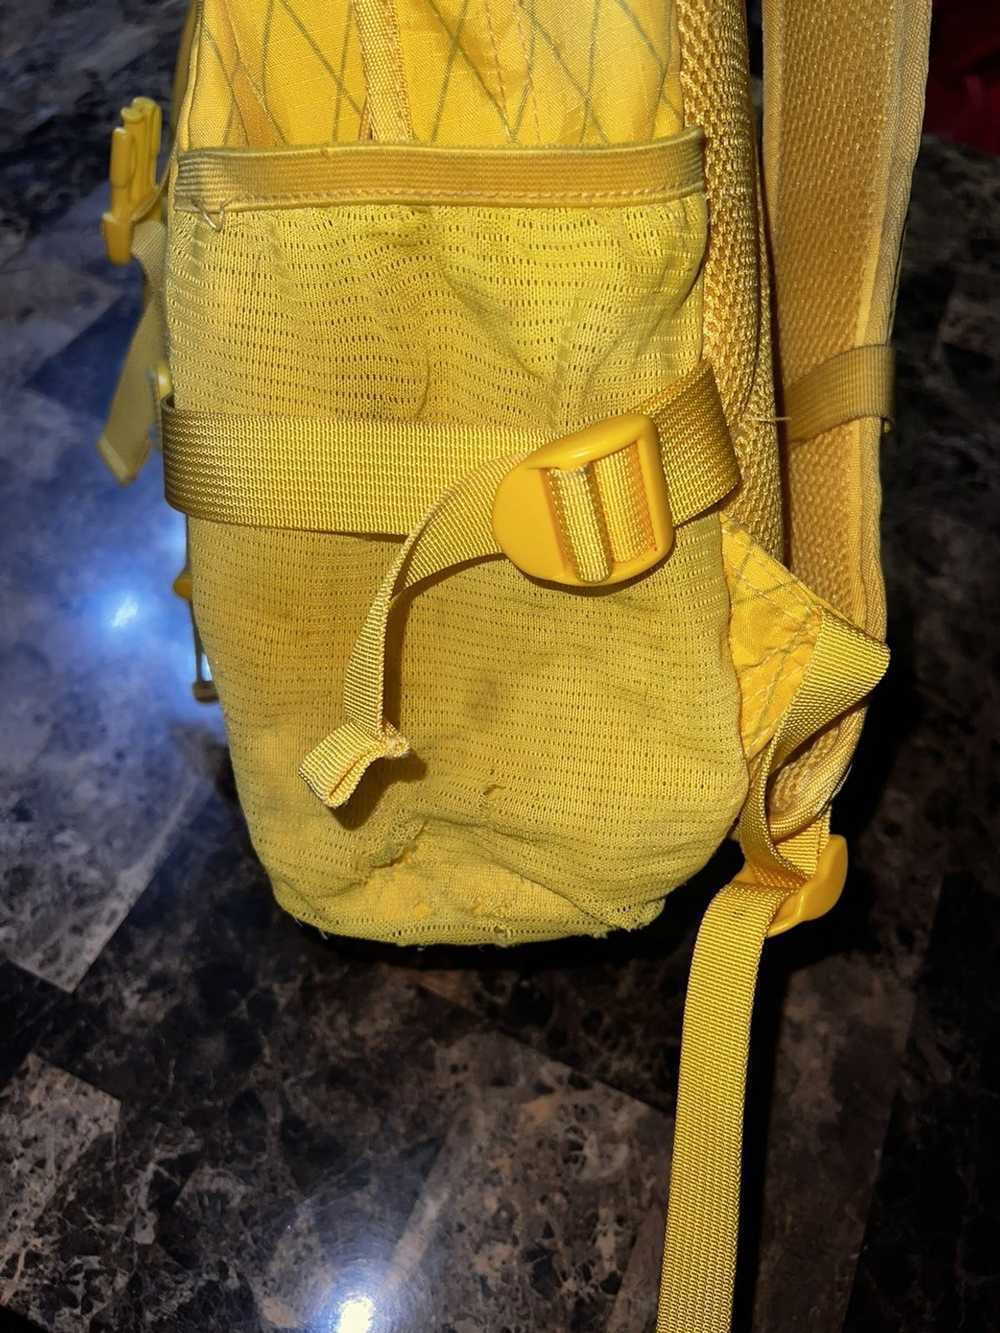 Supreme - Backpack (FW18) - Used